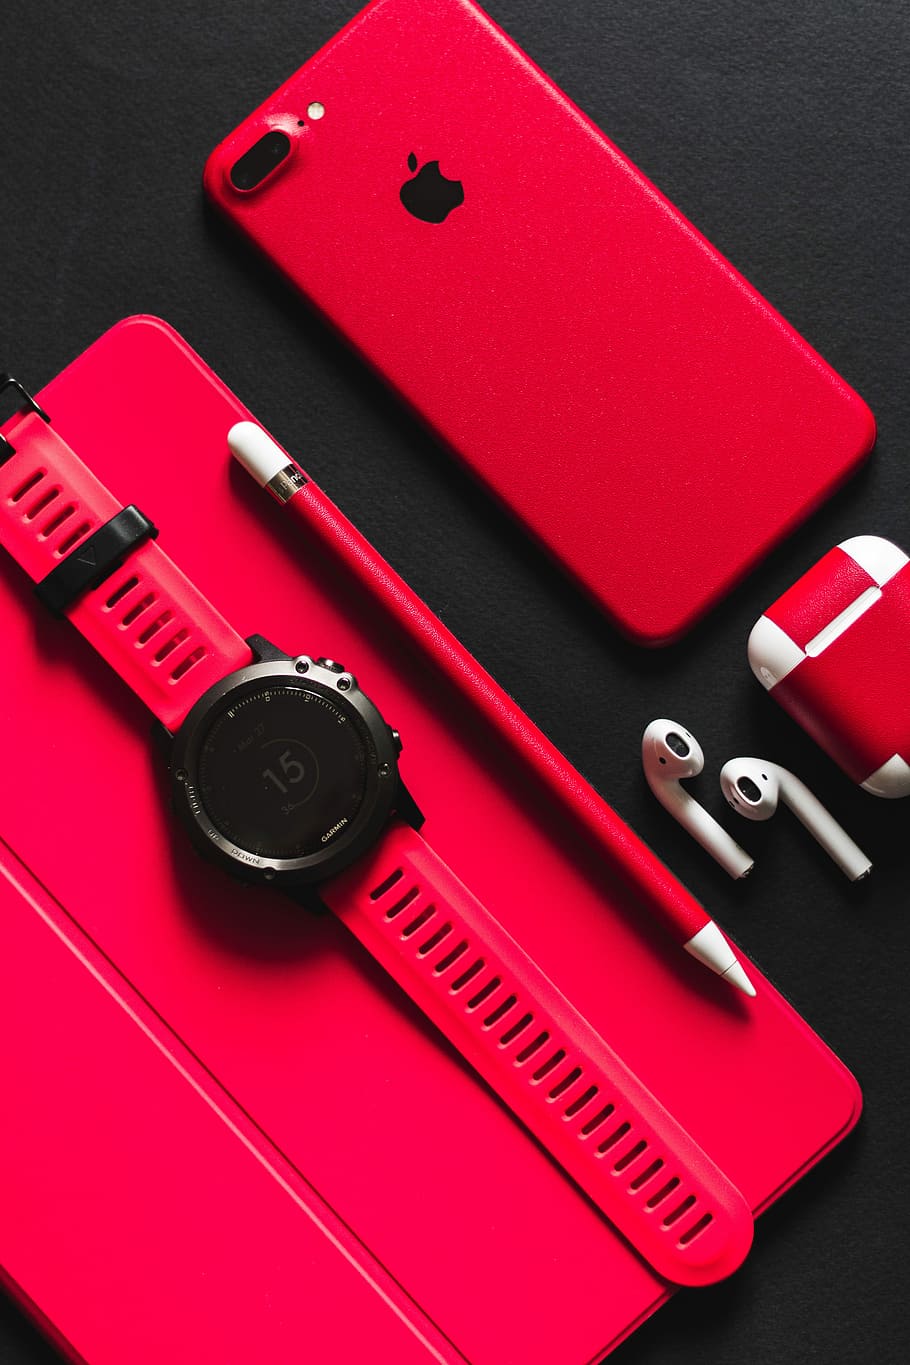 smartwatch, stylus, AirPods, and product red iPhone 7 on black surface, PRODUCT RED iPhone 7 Plus, AirPods, watch, and Apple Pencil on black surface